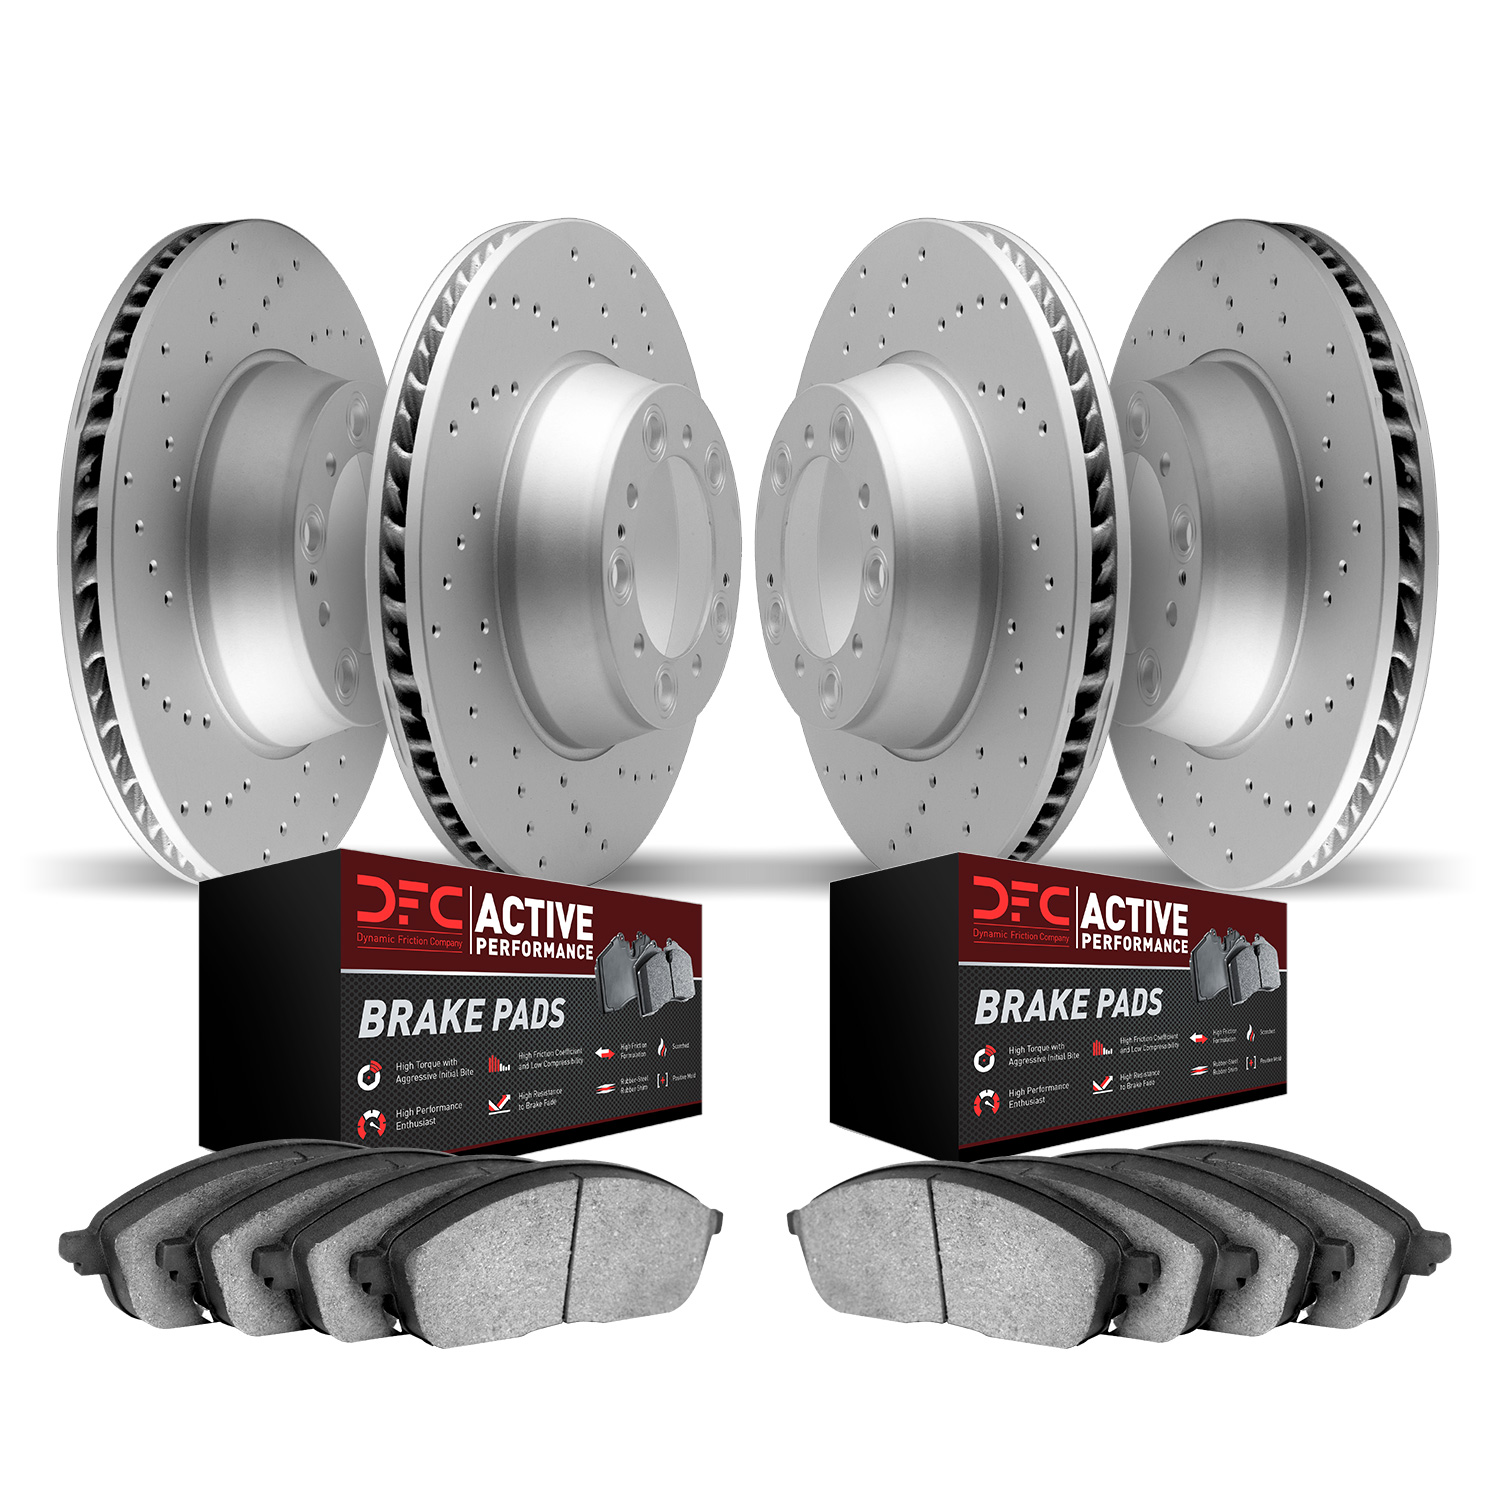 2704-72015 Geoperformance Drilled Brake Rotors with Active Performance Pads Kit, 2003-2006 Mitsubishi, Position: Front and Rear